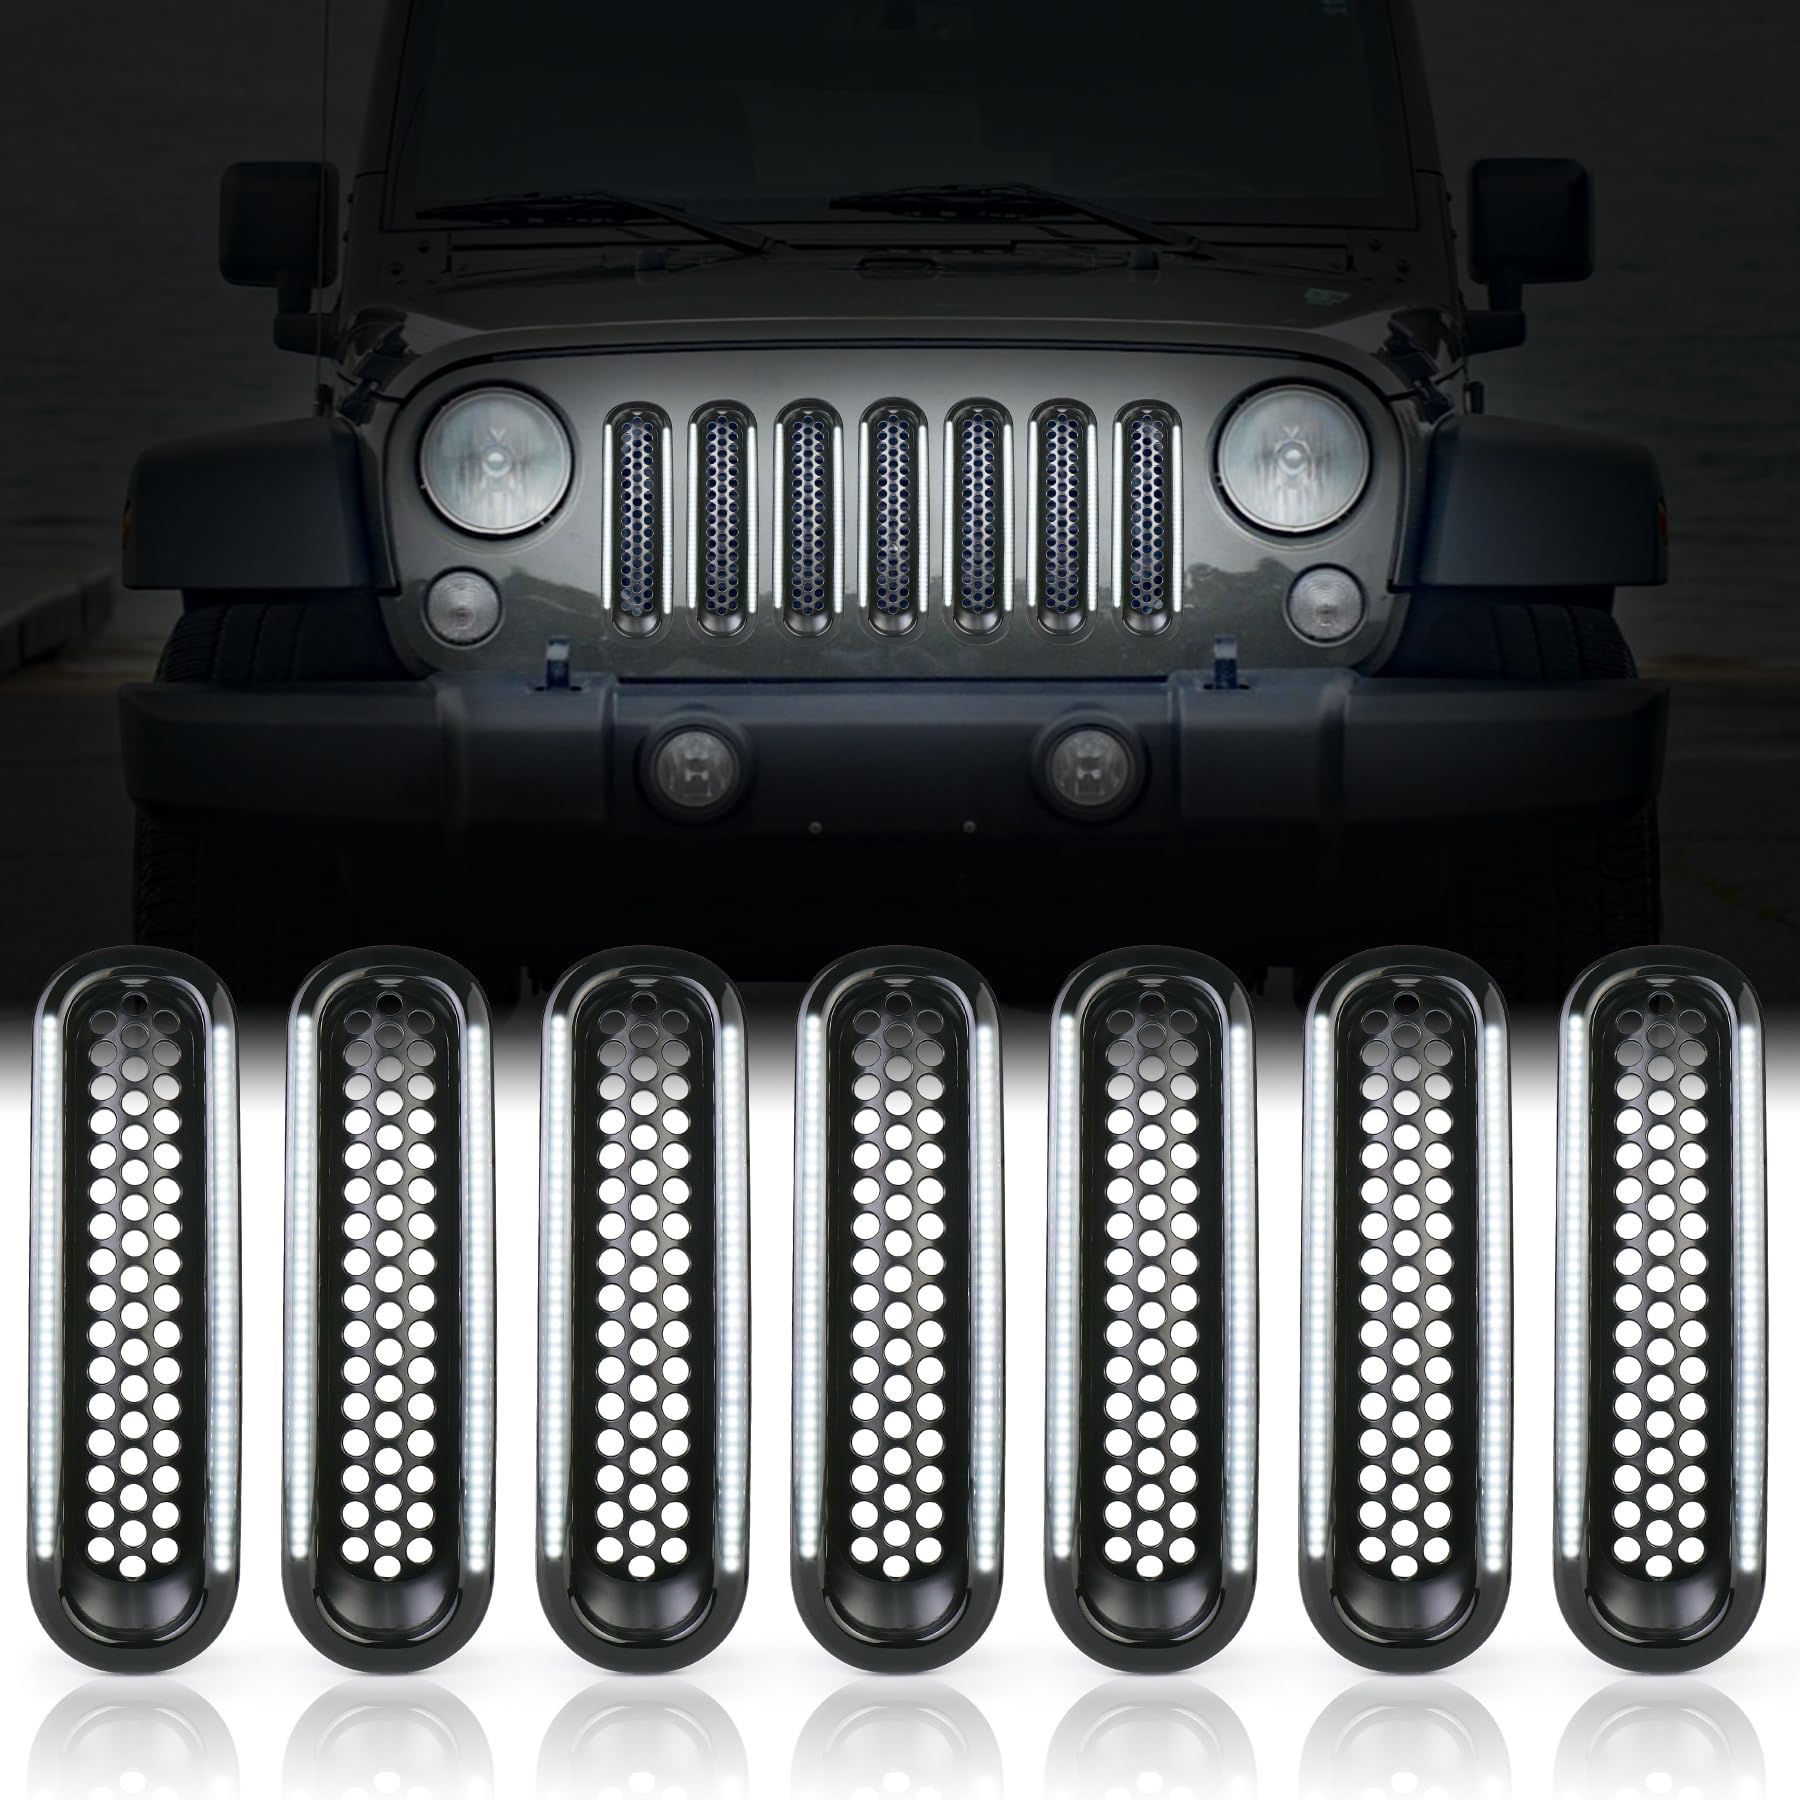 MOVOTOR JK Grill Inserts with Sequential Led Lights for Jeep,Matte Black Front Mesh Grill Accessories for Jeep Wrangler JK & Wrangler Unlimited 2007-2015